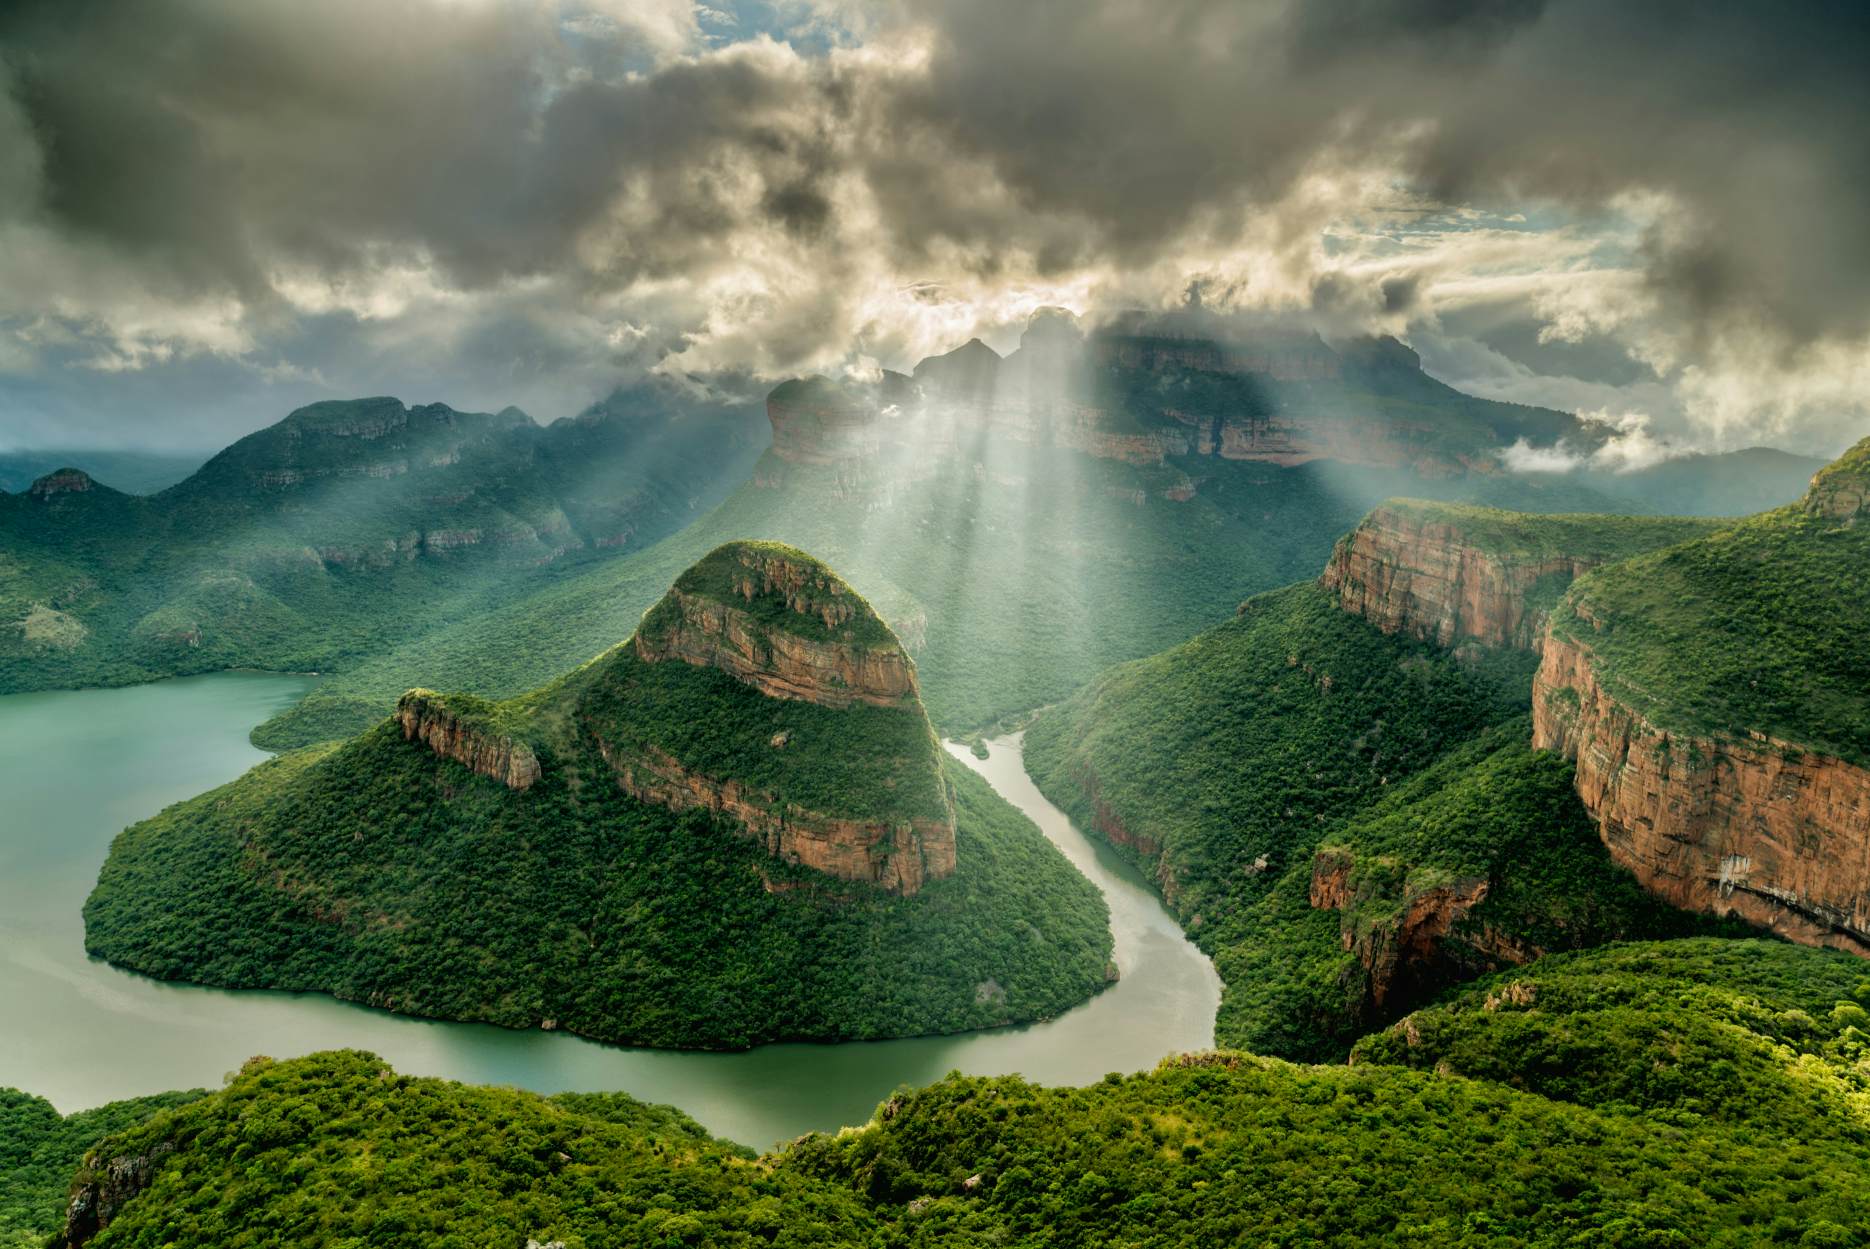 River Canyon travel | South Africa, Africa - Lonely Planet